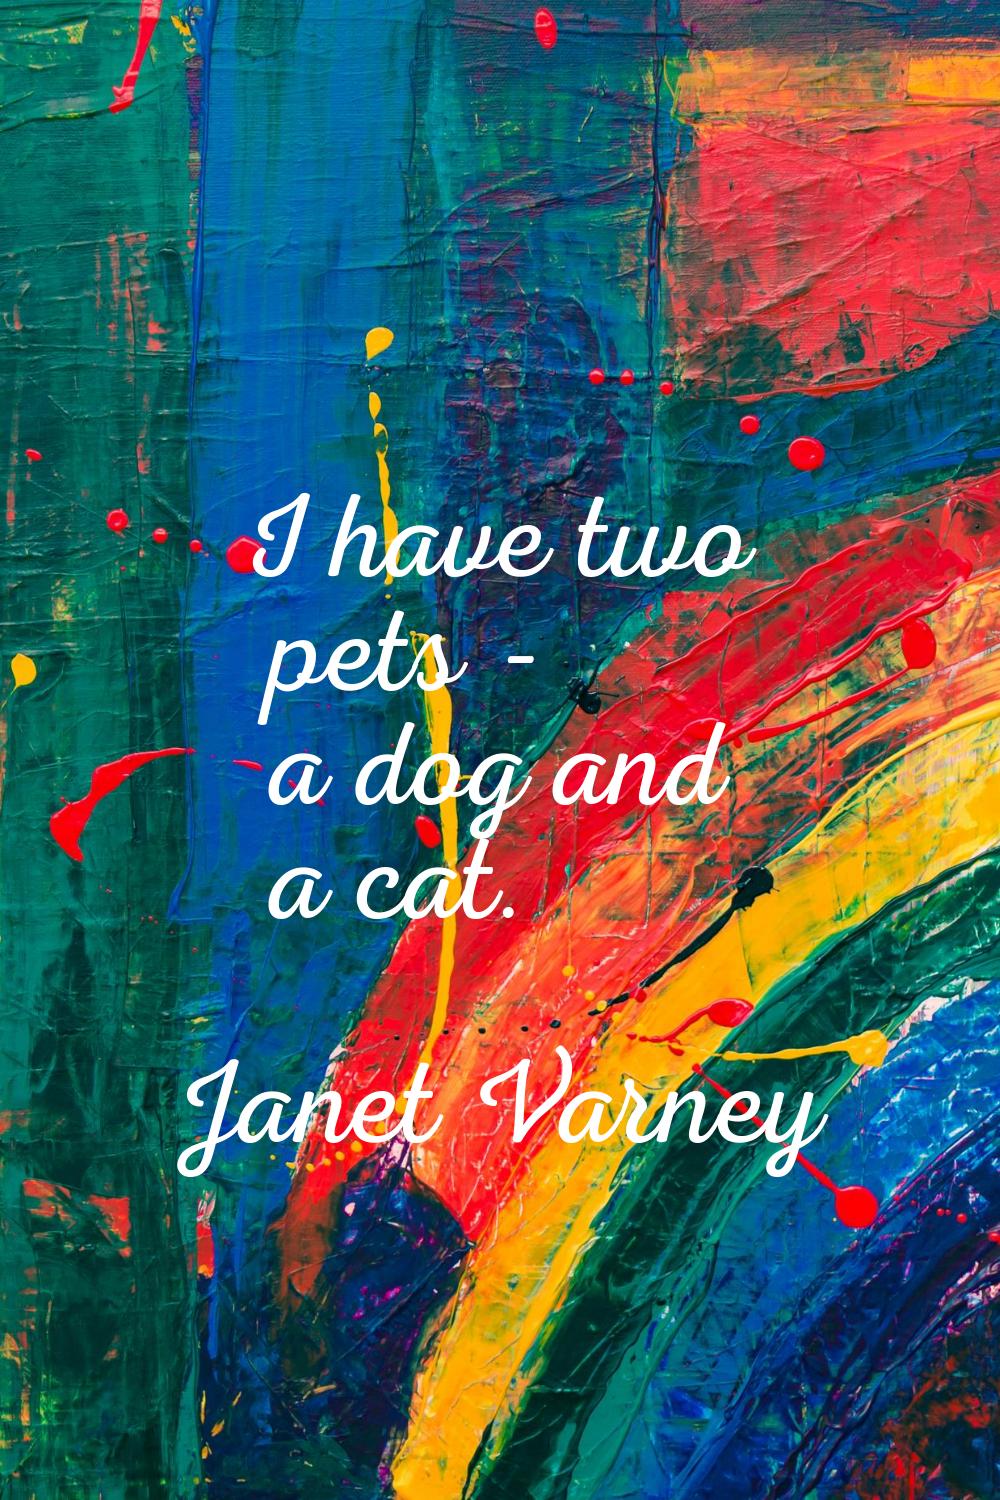 I have two pets - a dog and a cat.